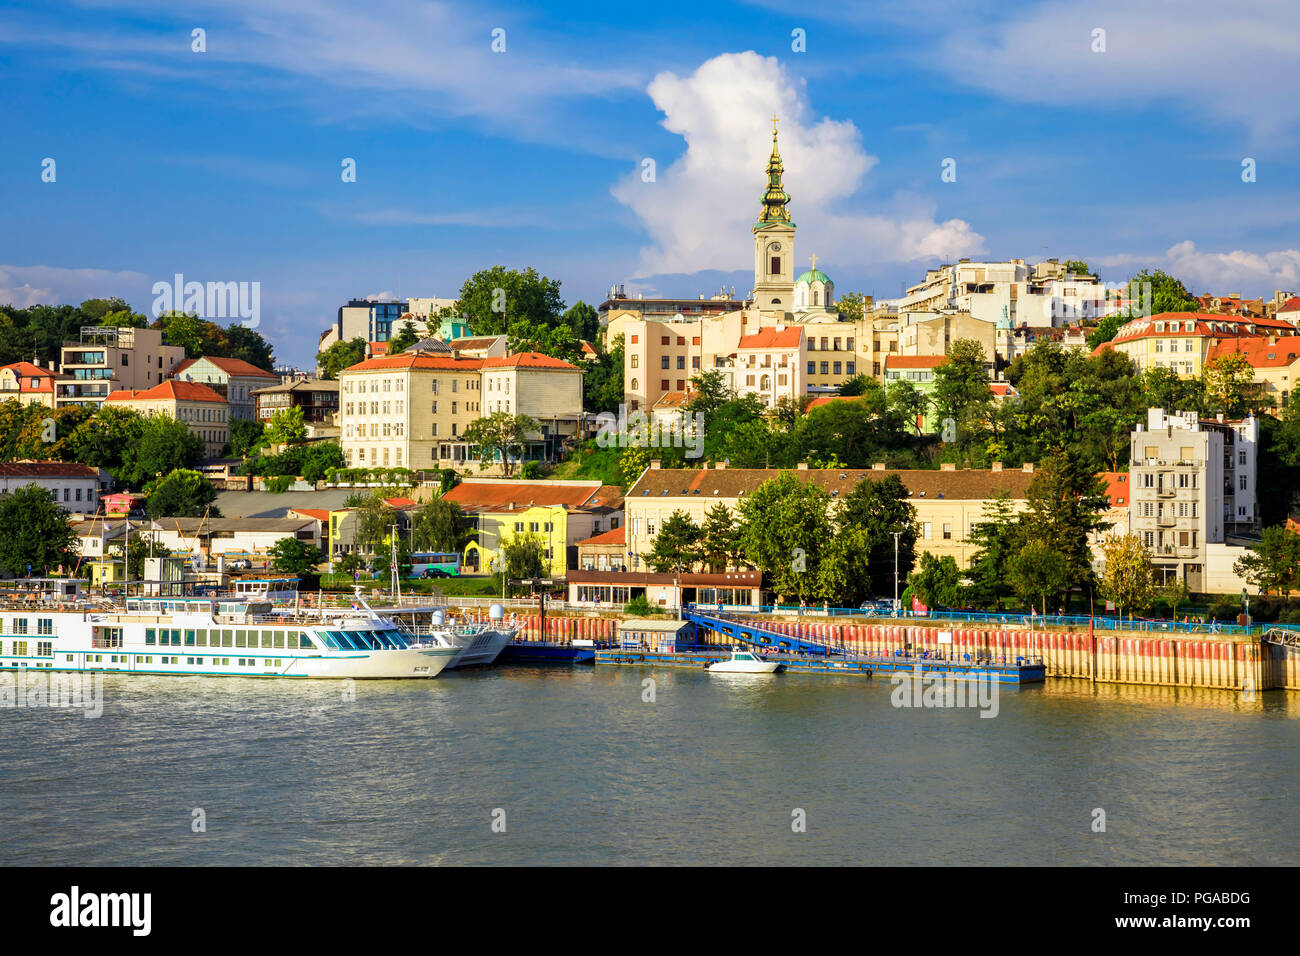 Historic center of Belgrade on the banks of the Sava River Stock Photo